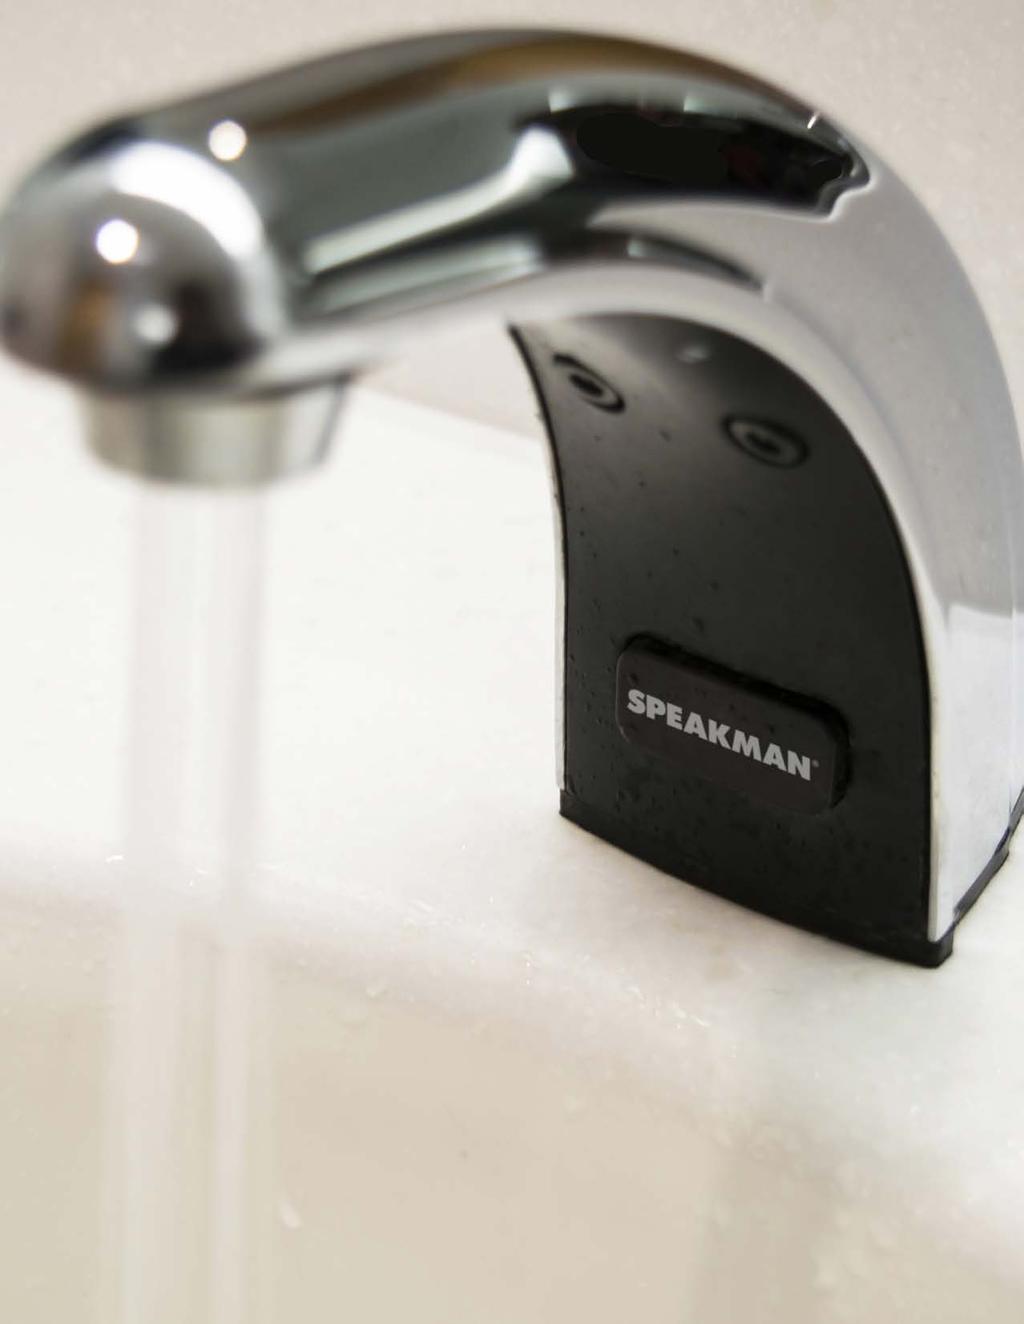 SENSORFLO Commercial faucets are handled, day-in and day-out, more than any other appliance on your property. With faucets, longevity is everything.